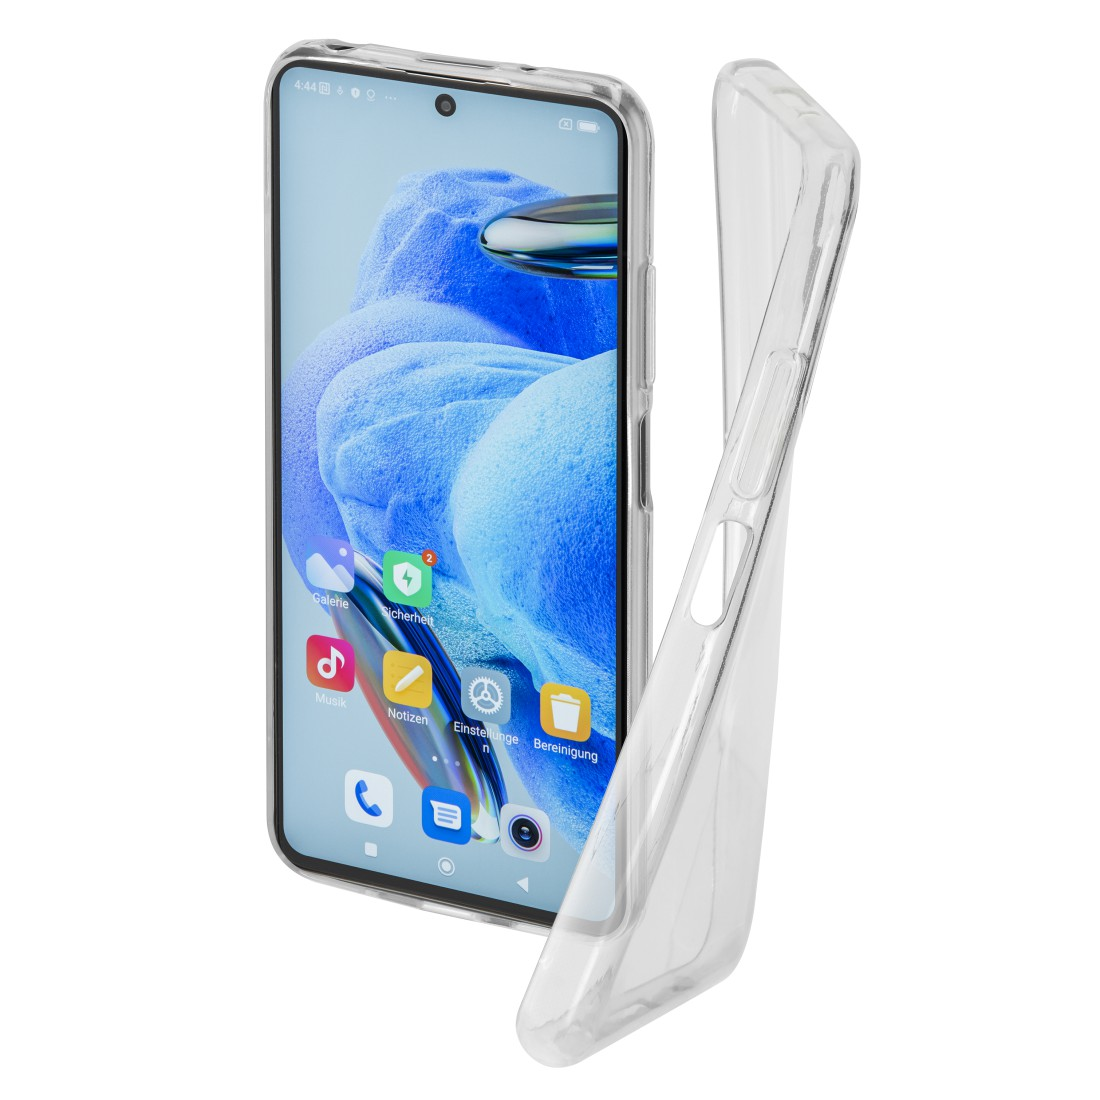 HAMA Crystal Clear, 12 5G, Note Backcover, Pro Xiaomi, Redmi Transparent